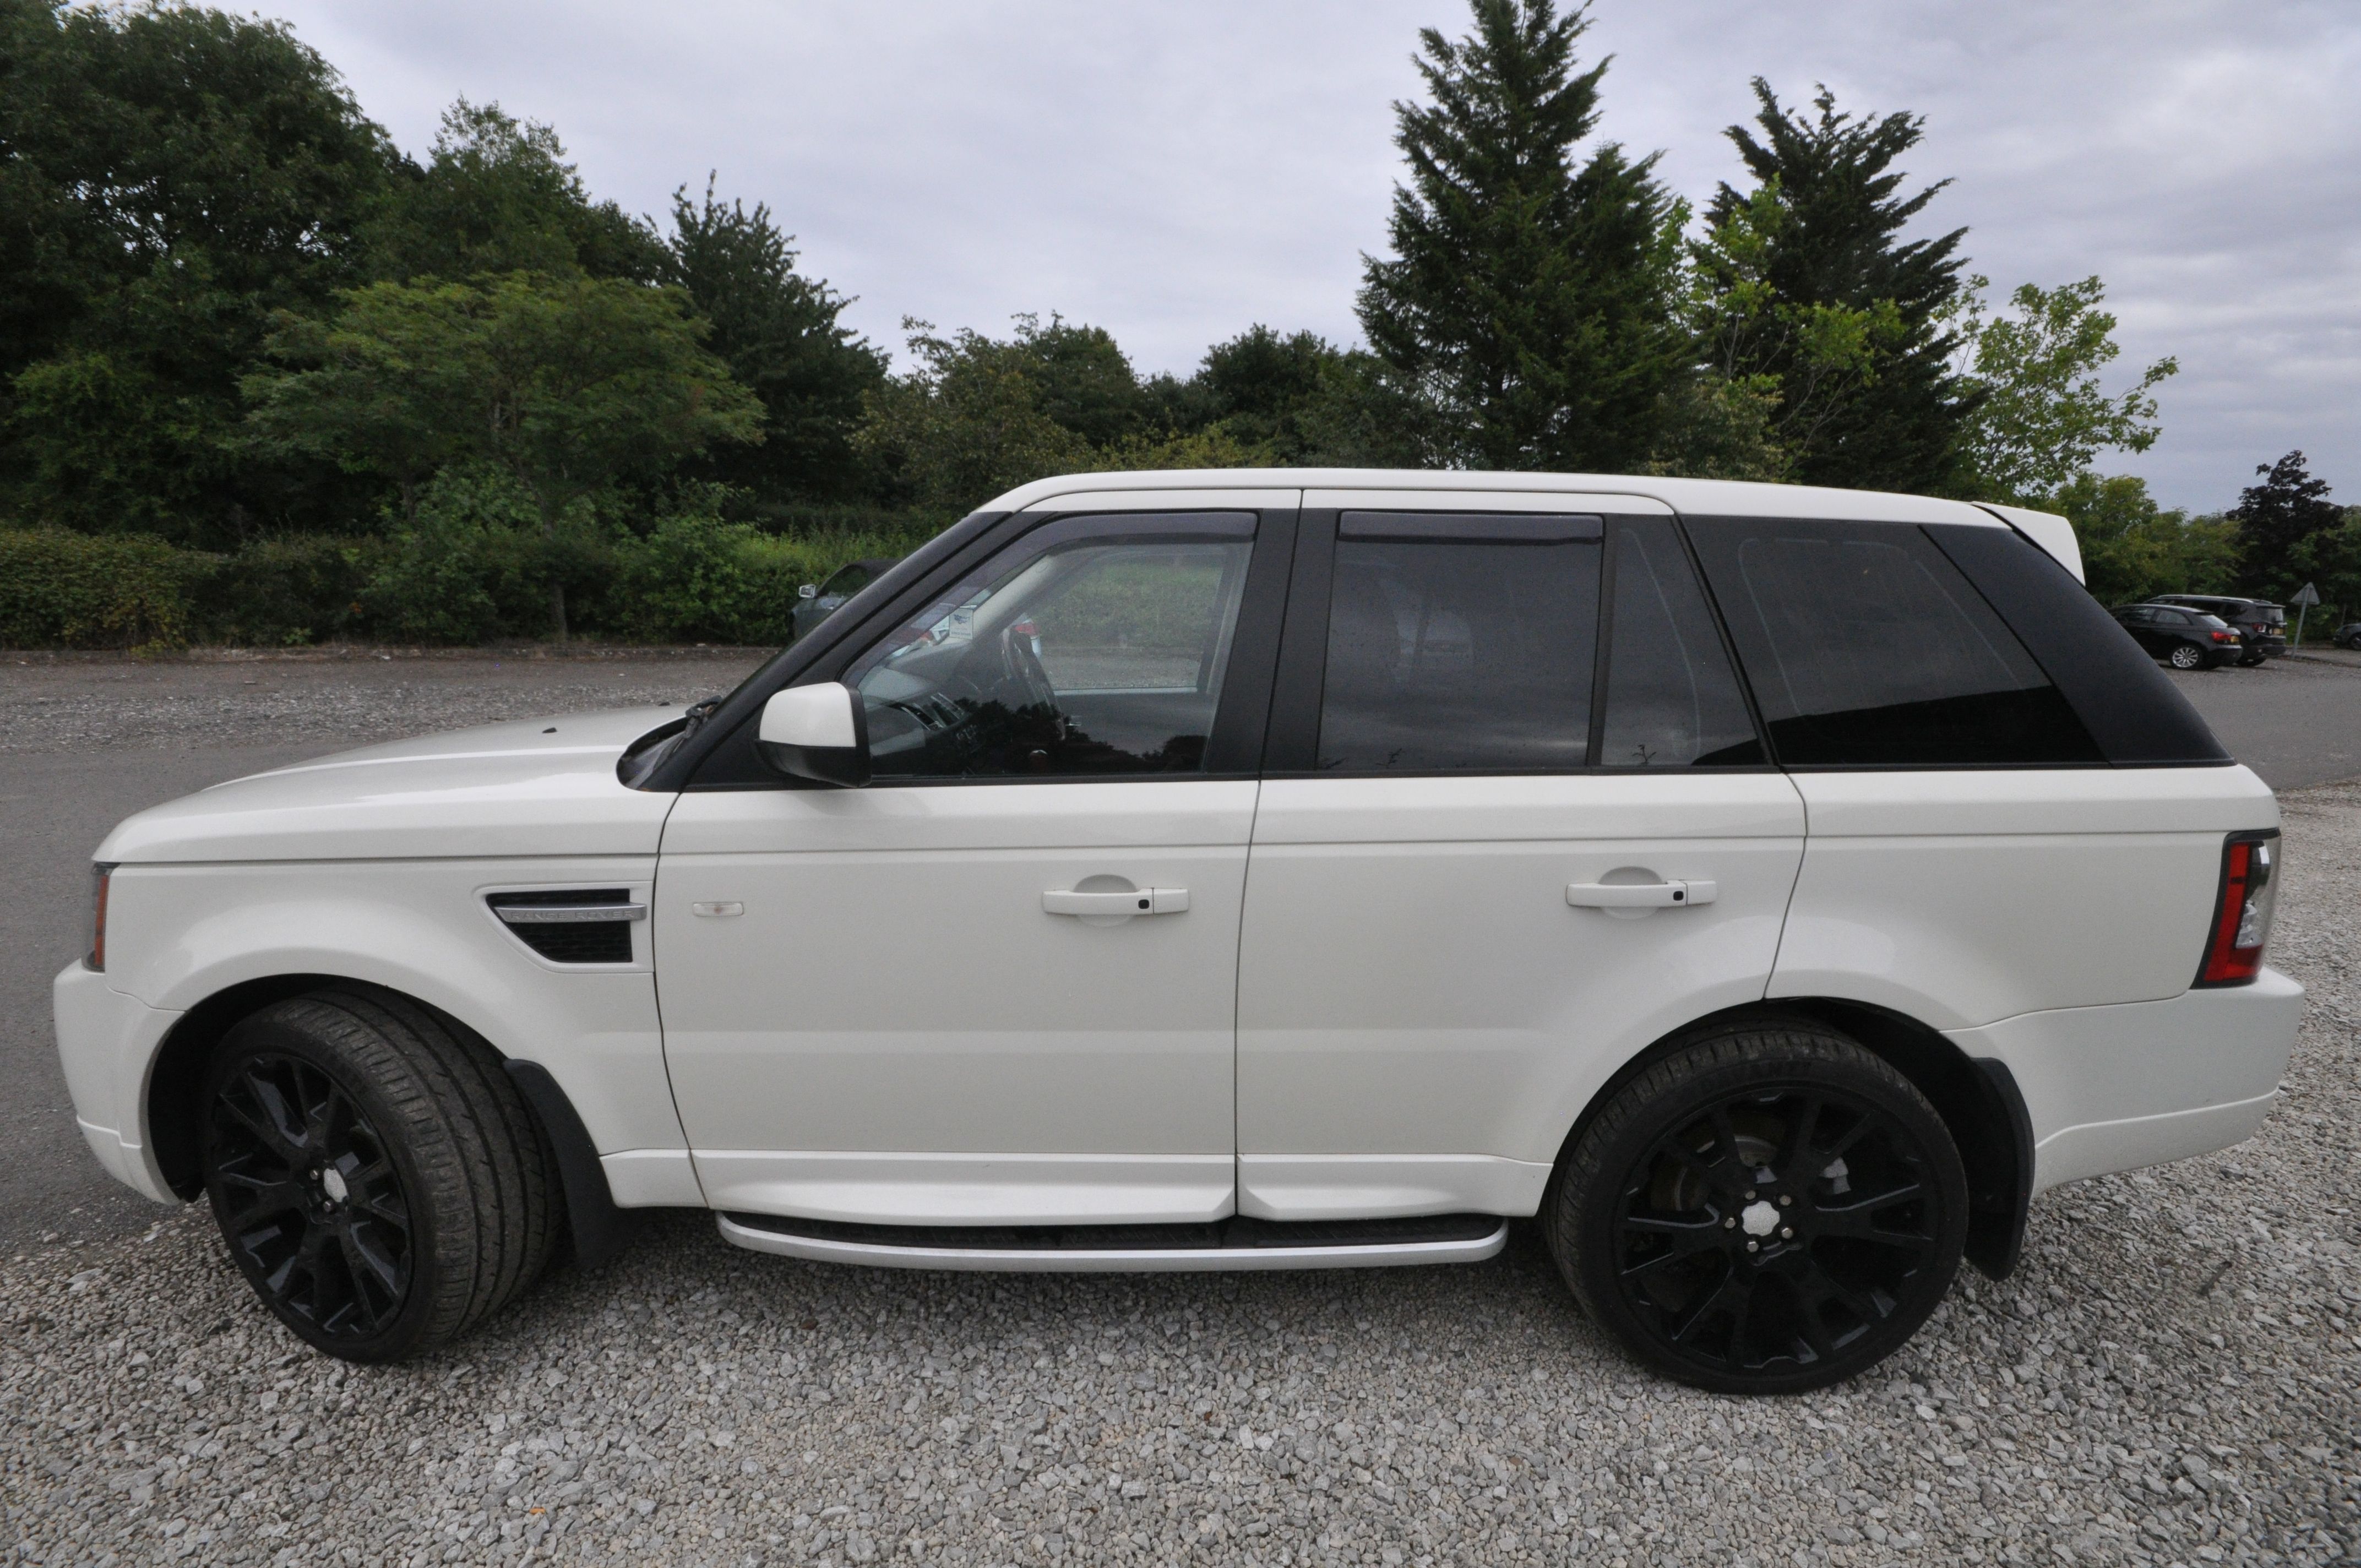 A 2010 RANGE ROVER SPORT - K9 OBP - This Range Rover Sport 3.6 TDV8 Autobiography Sport with - Image 7 of 9